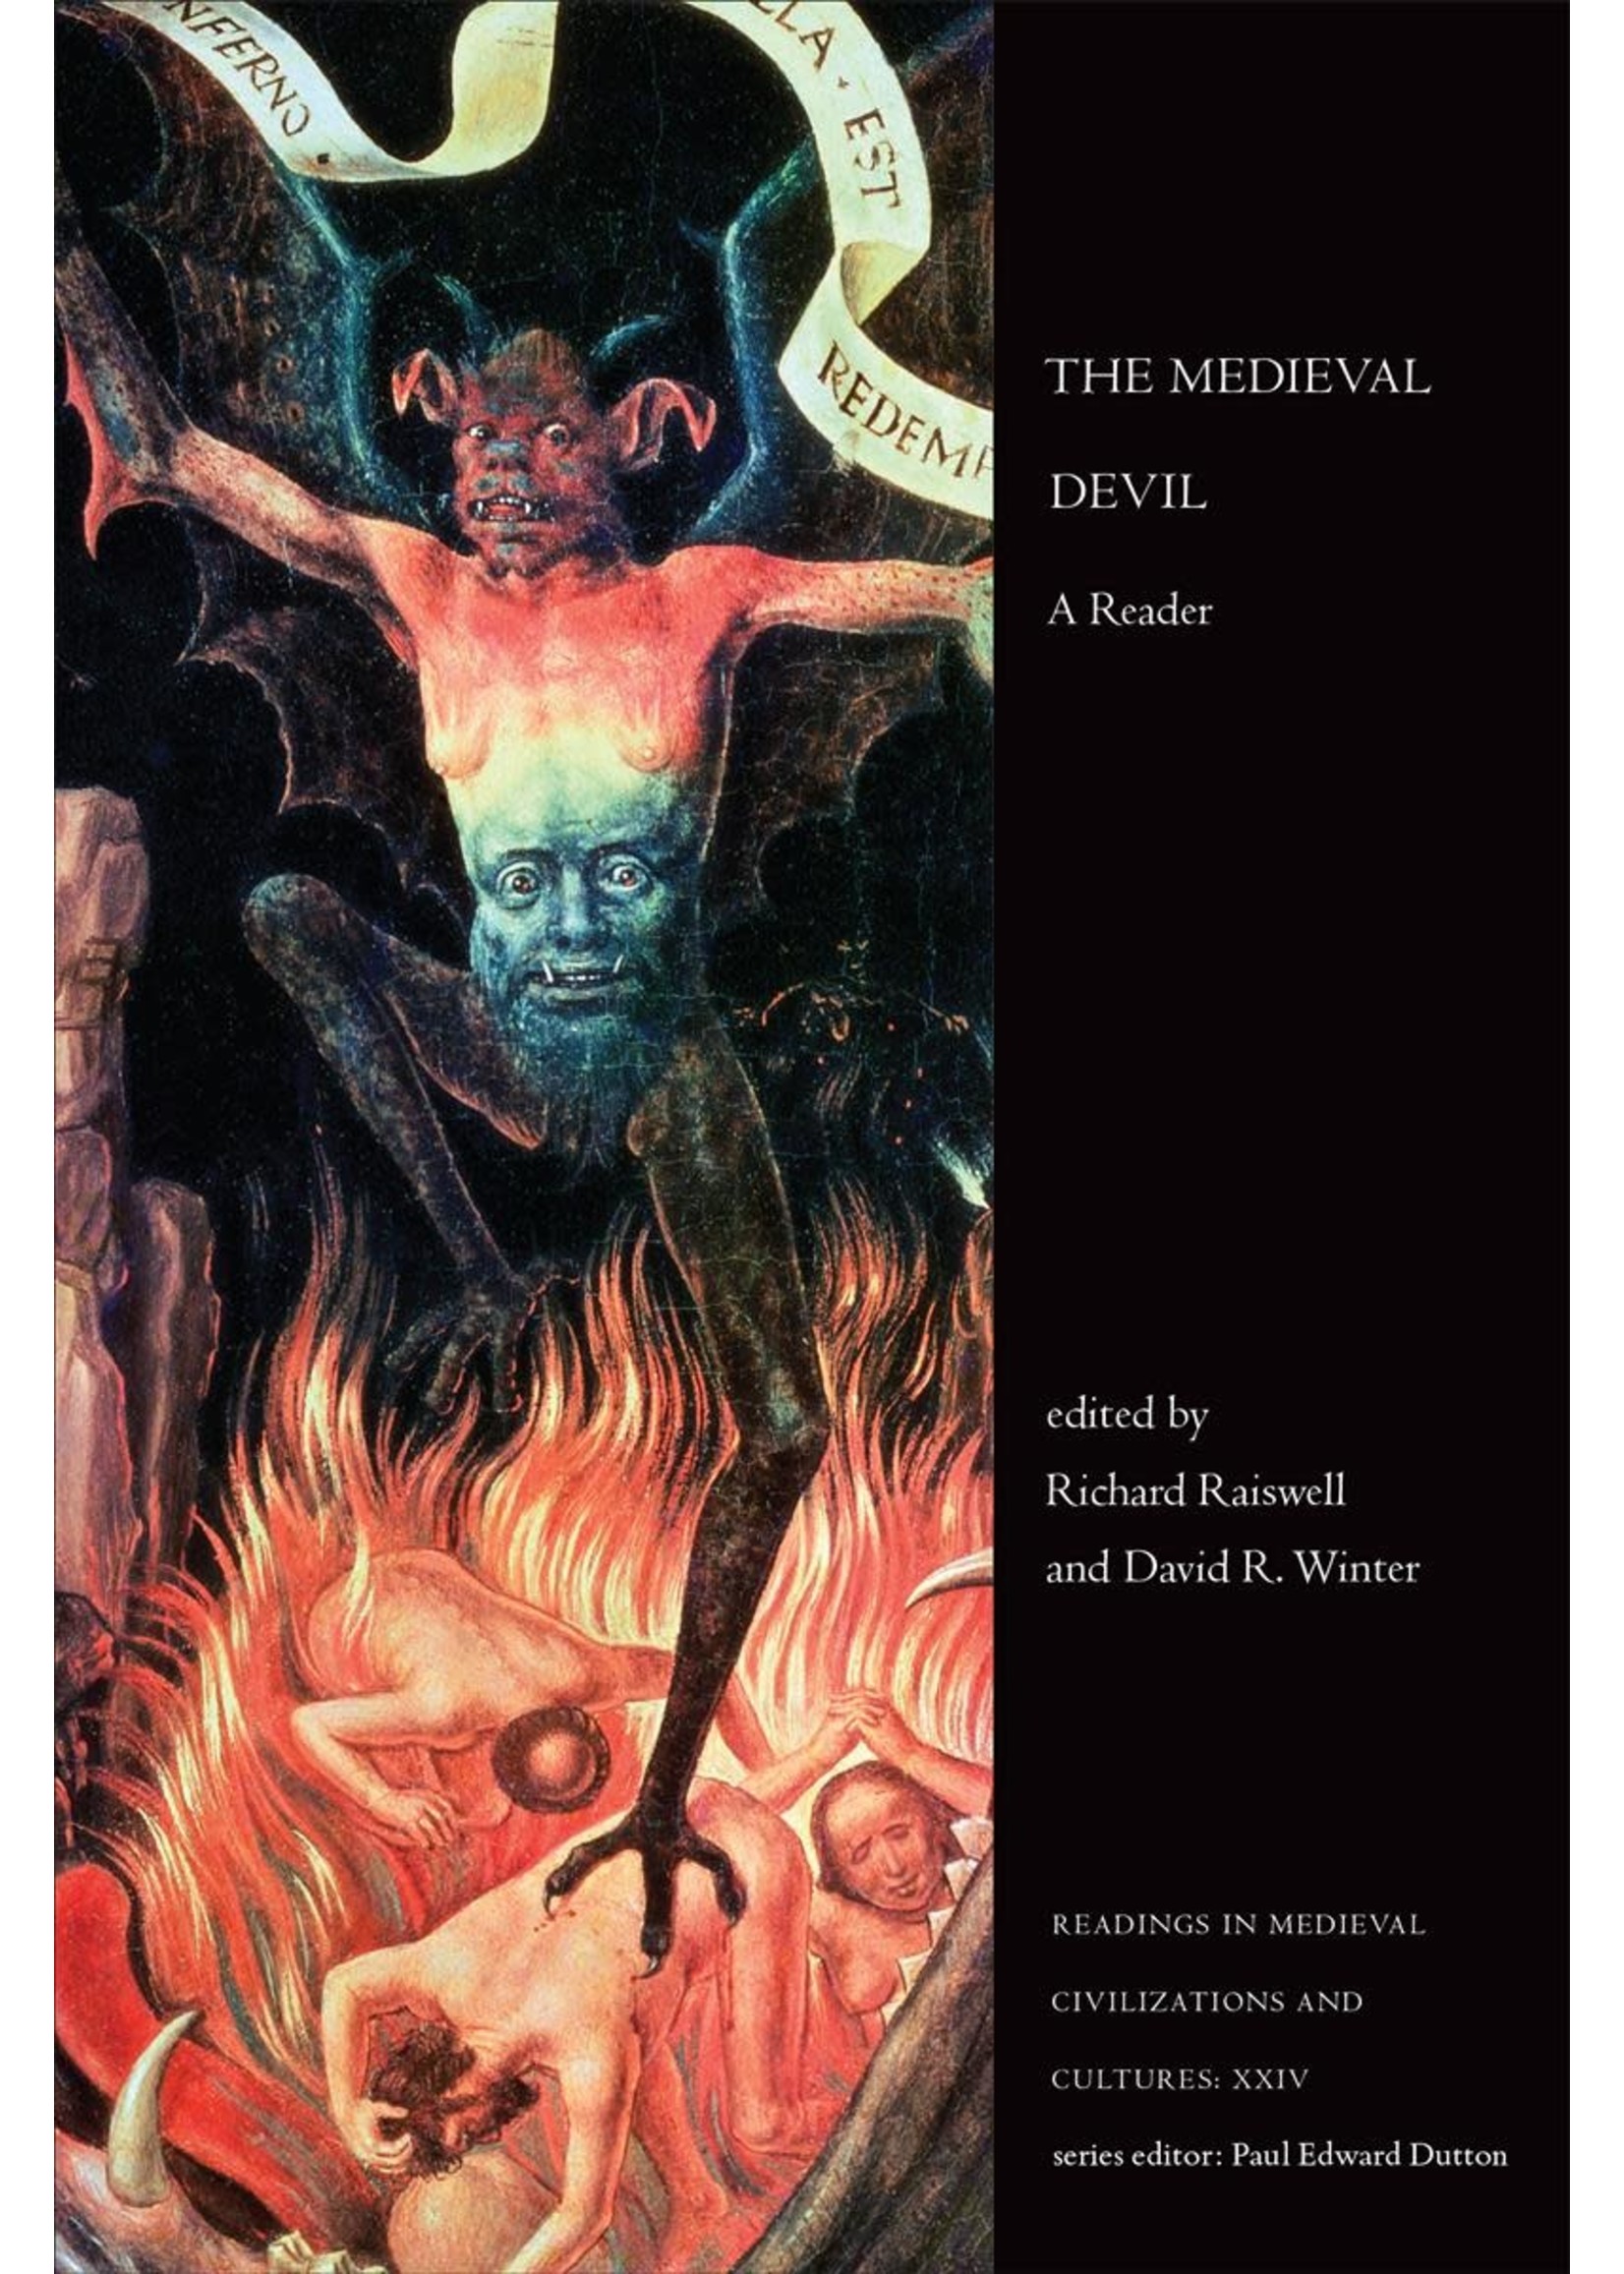 The Medieval Devil: A Reader by Richard Raiswell, David R. Winter